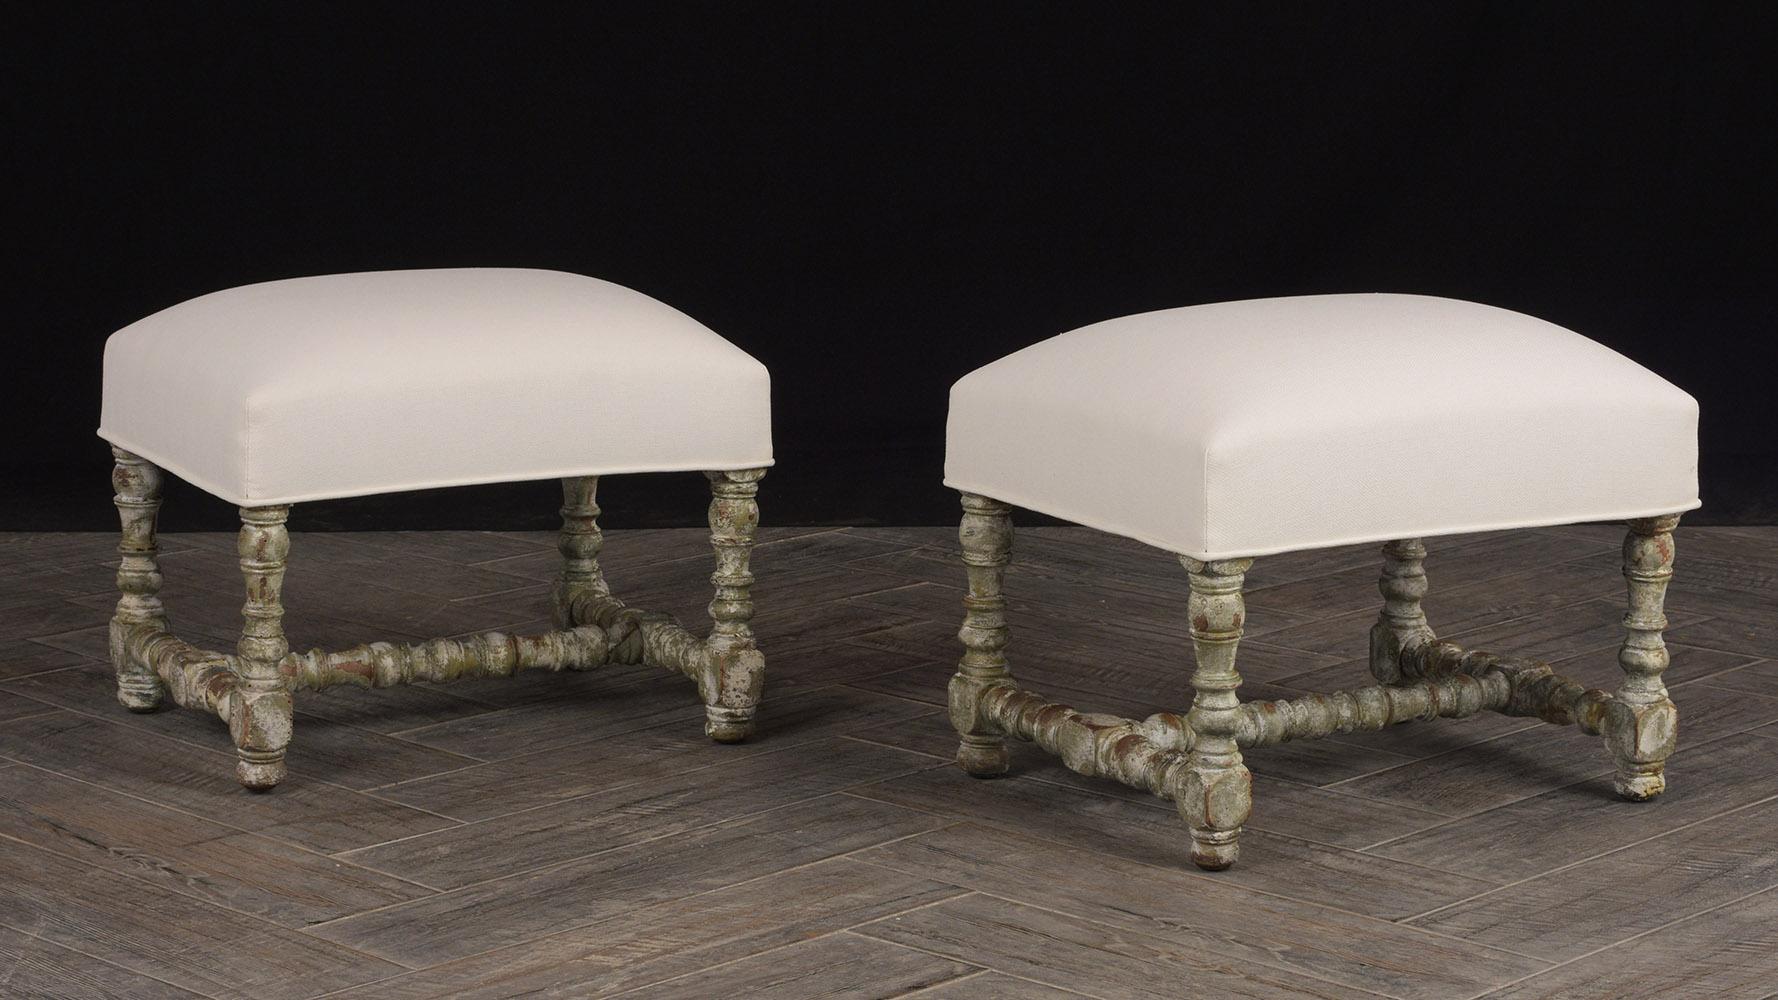 Foam Set of 2 of Carved Benches or Stools, circa 1860s